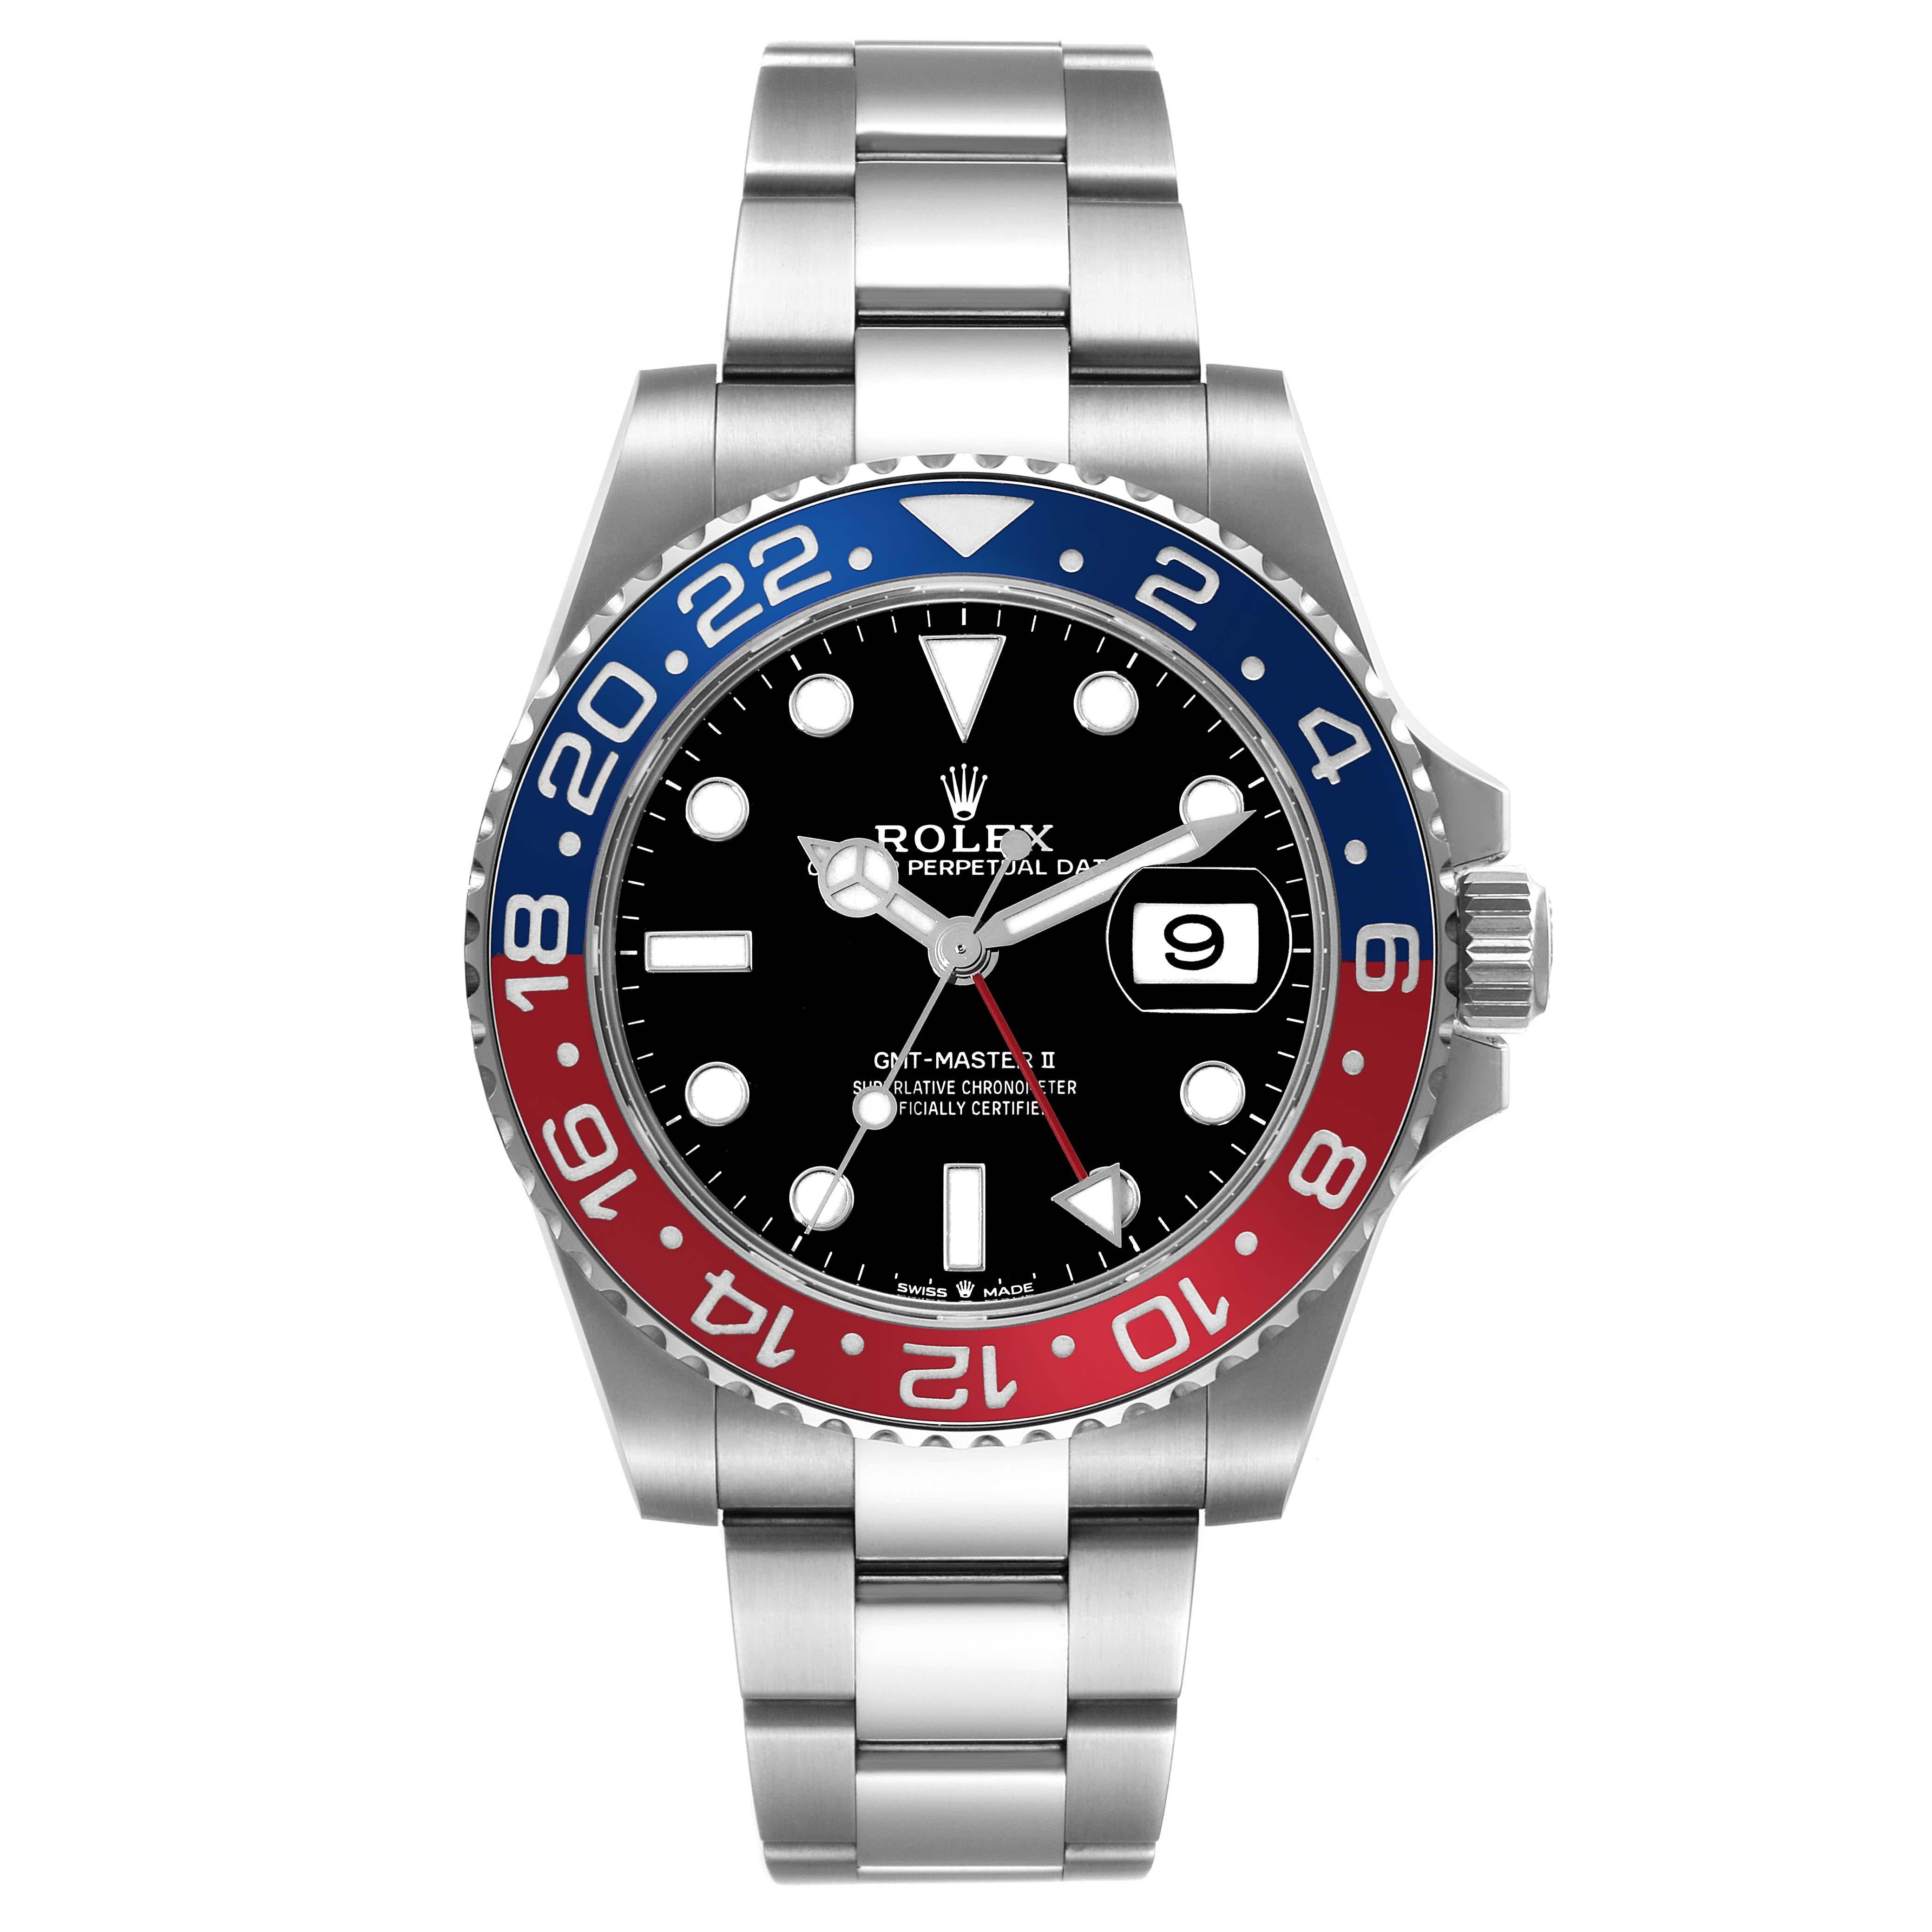 Rolex GMT Master II Blue Red Pepsi Bezel Steel Mens Watch 126710. Officially certified chronometer automatic self-winding movement. Stainless steel case 40 mm in diameter. Rolex logo on the crown. Stainless steel bidirectional rotating bezel with